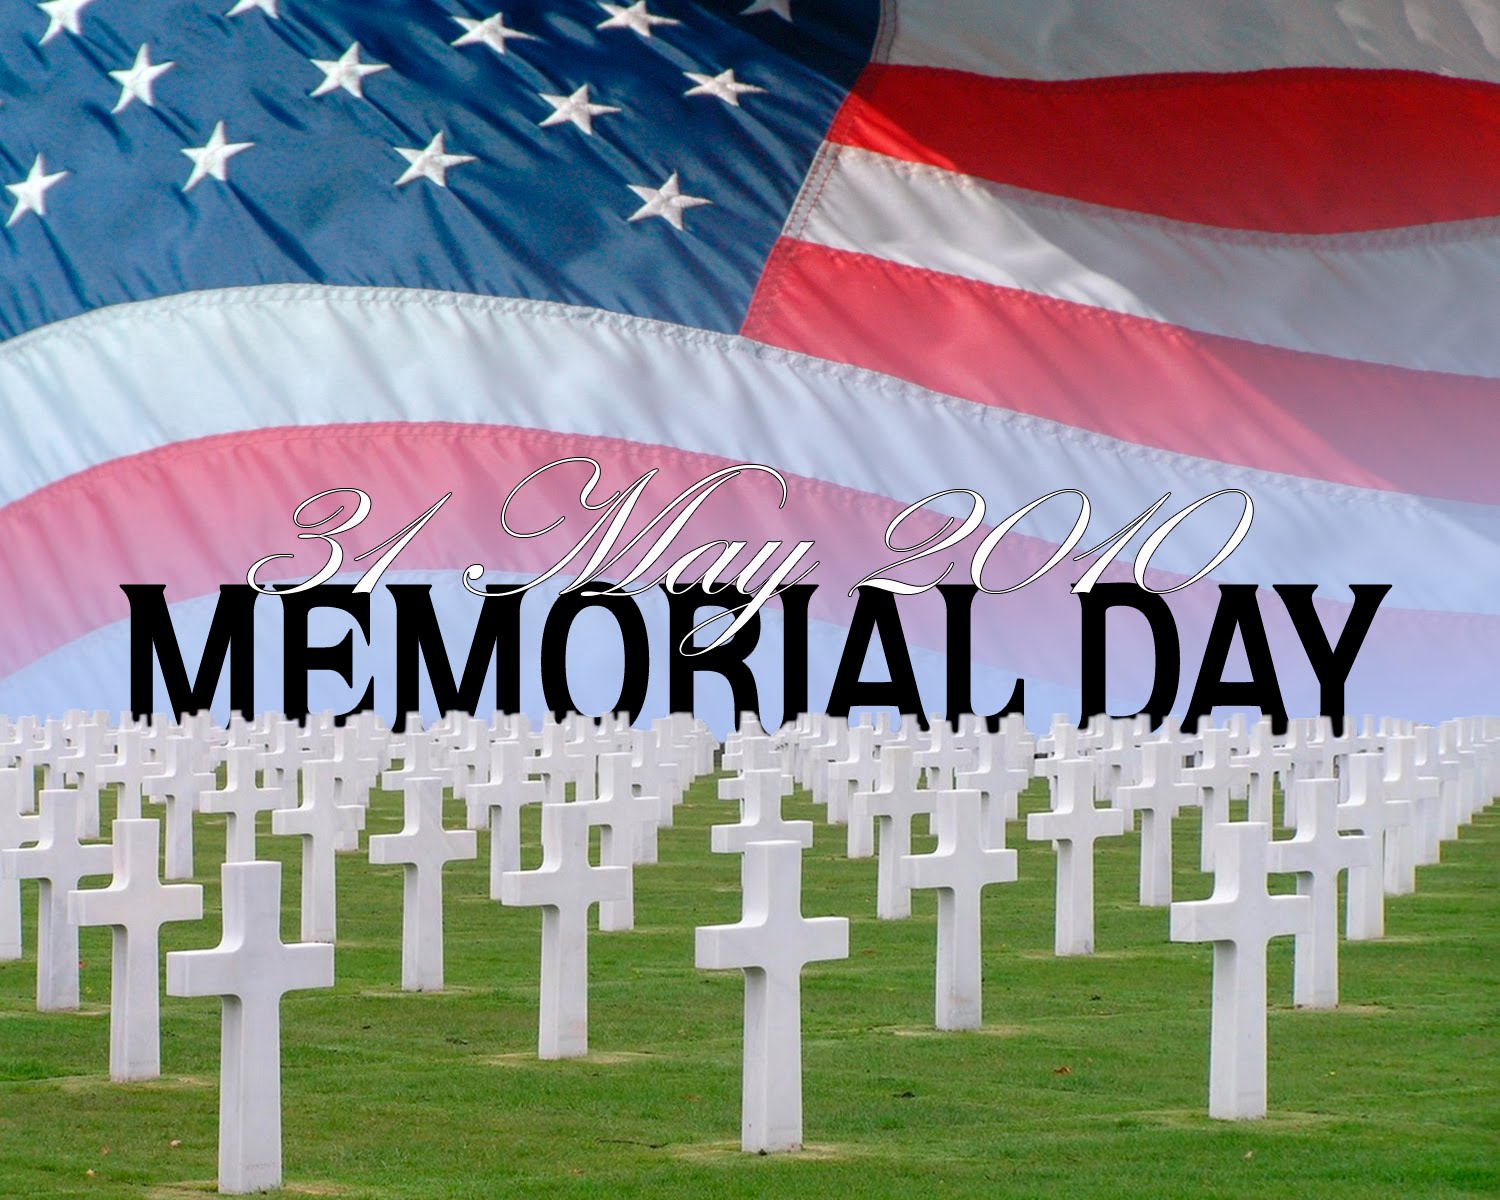 free clipart images for memorial day - photo #46